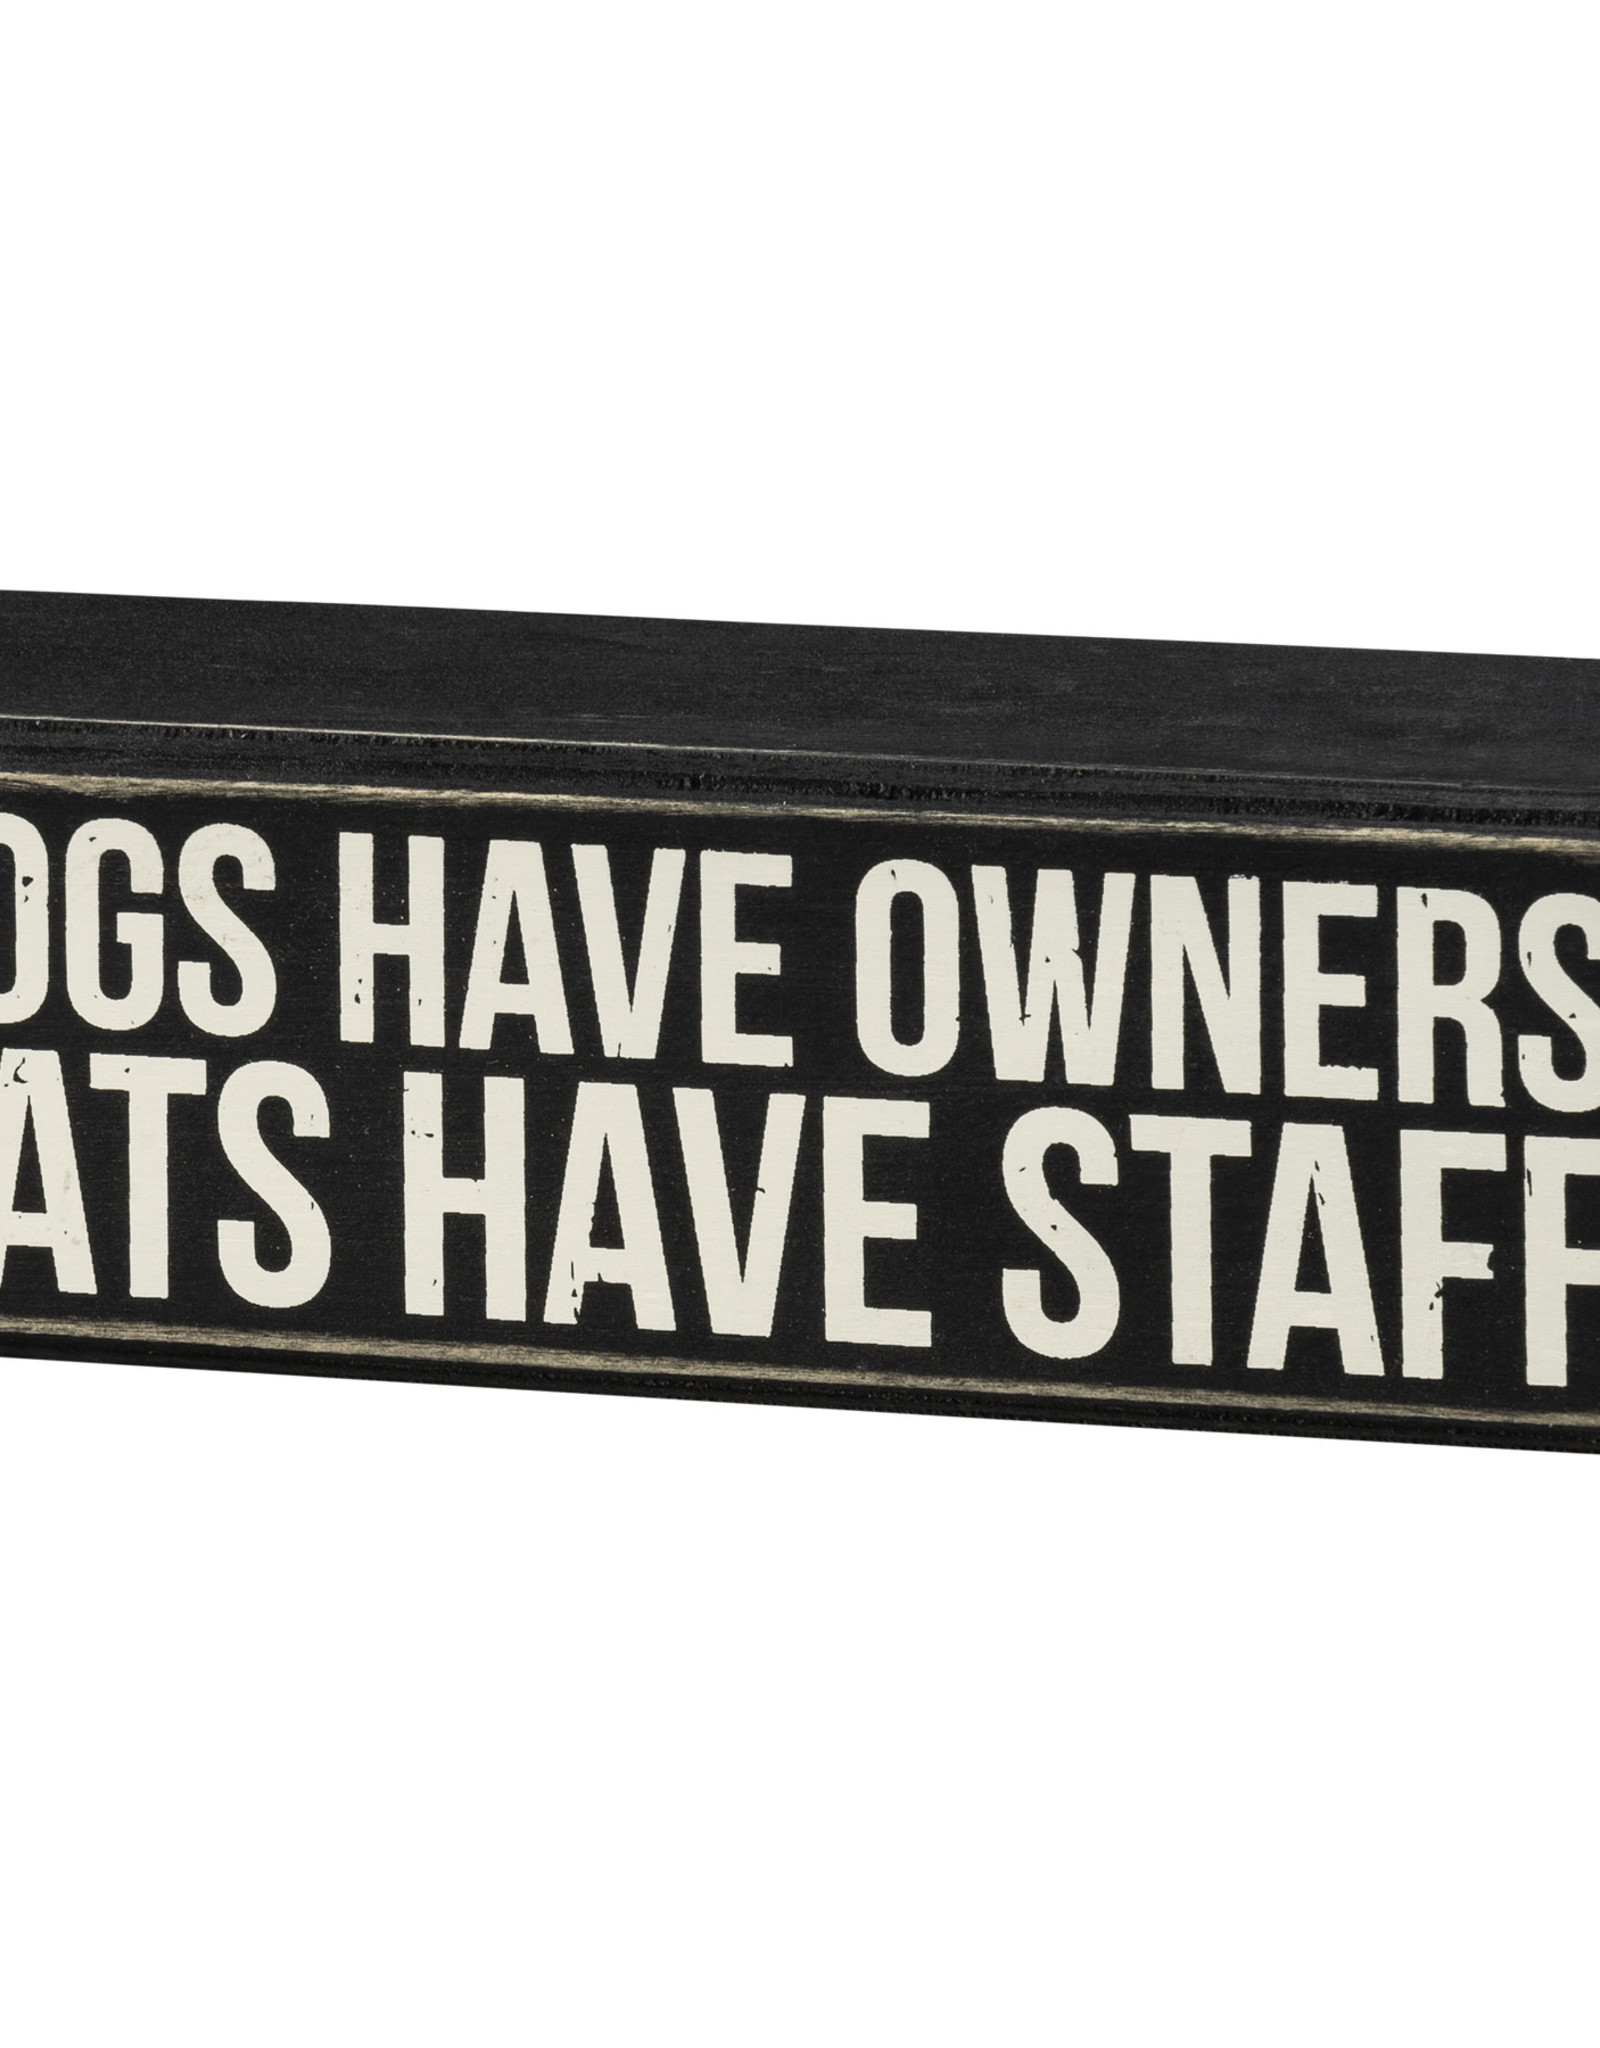 Box Sign - Dogs Have Owners Cats Have Staff